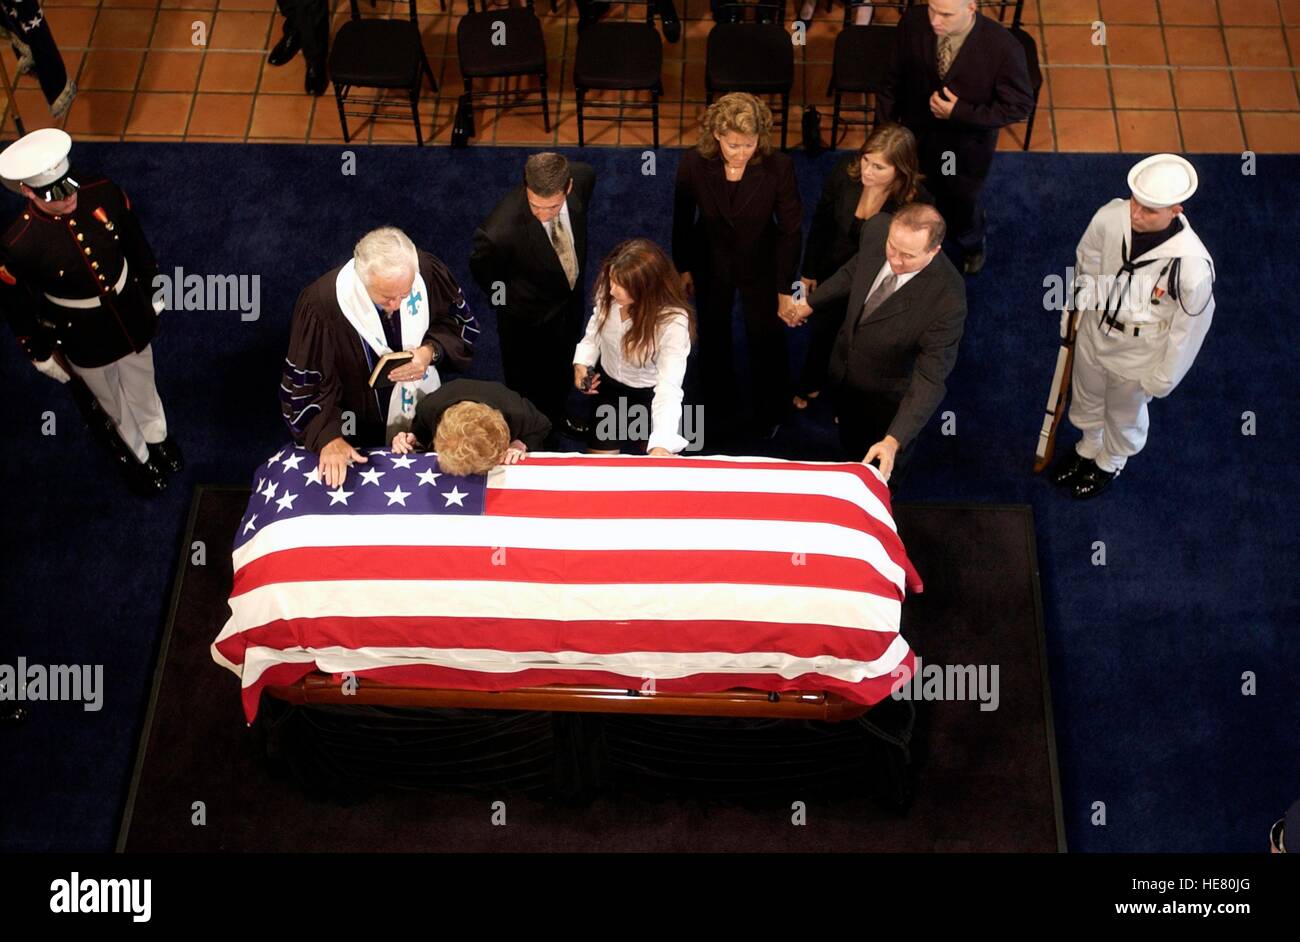 Former U.S. First Lady Nancy Reagan and family pay their respects to the casket of former U.S. President Ronald Reagan during a state funeral at the Ronald Reagan Presidential Library rotunda June 7, 2004 in Simi Valley, California. Stock Photo